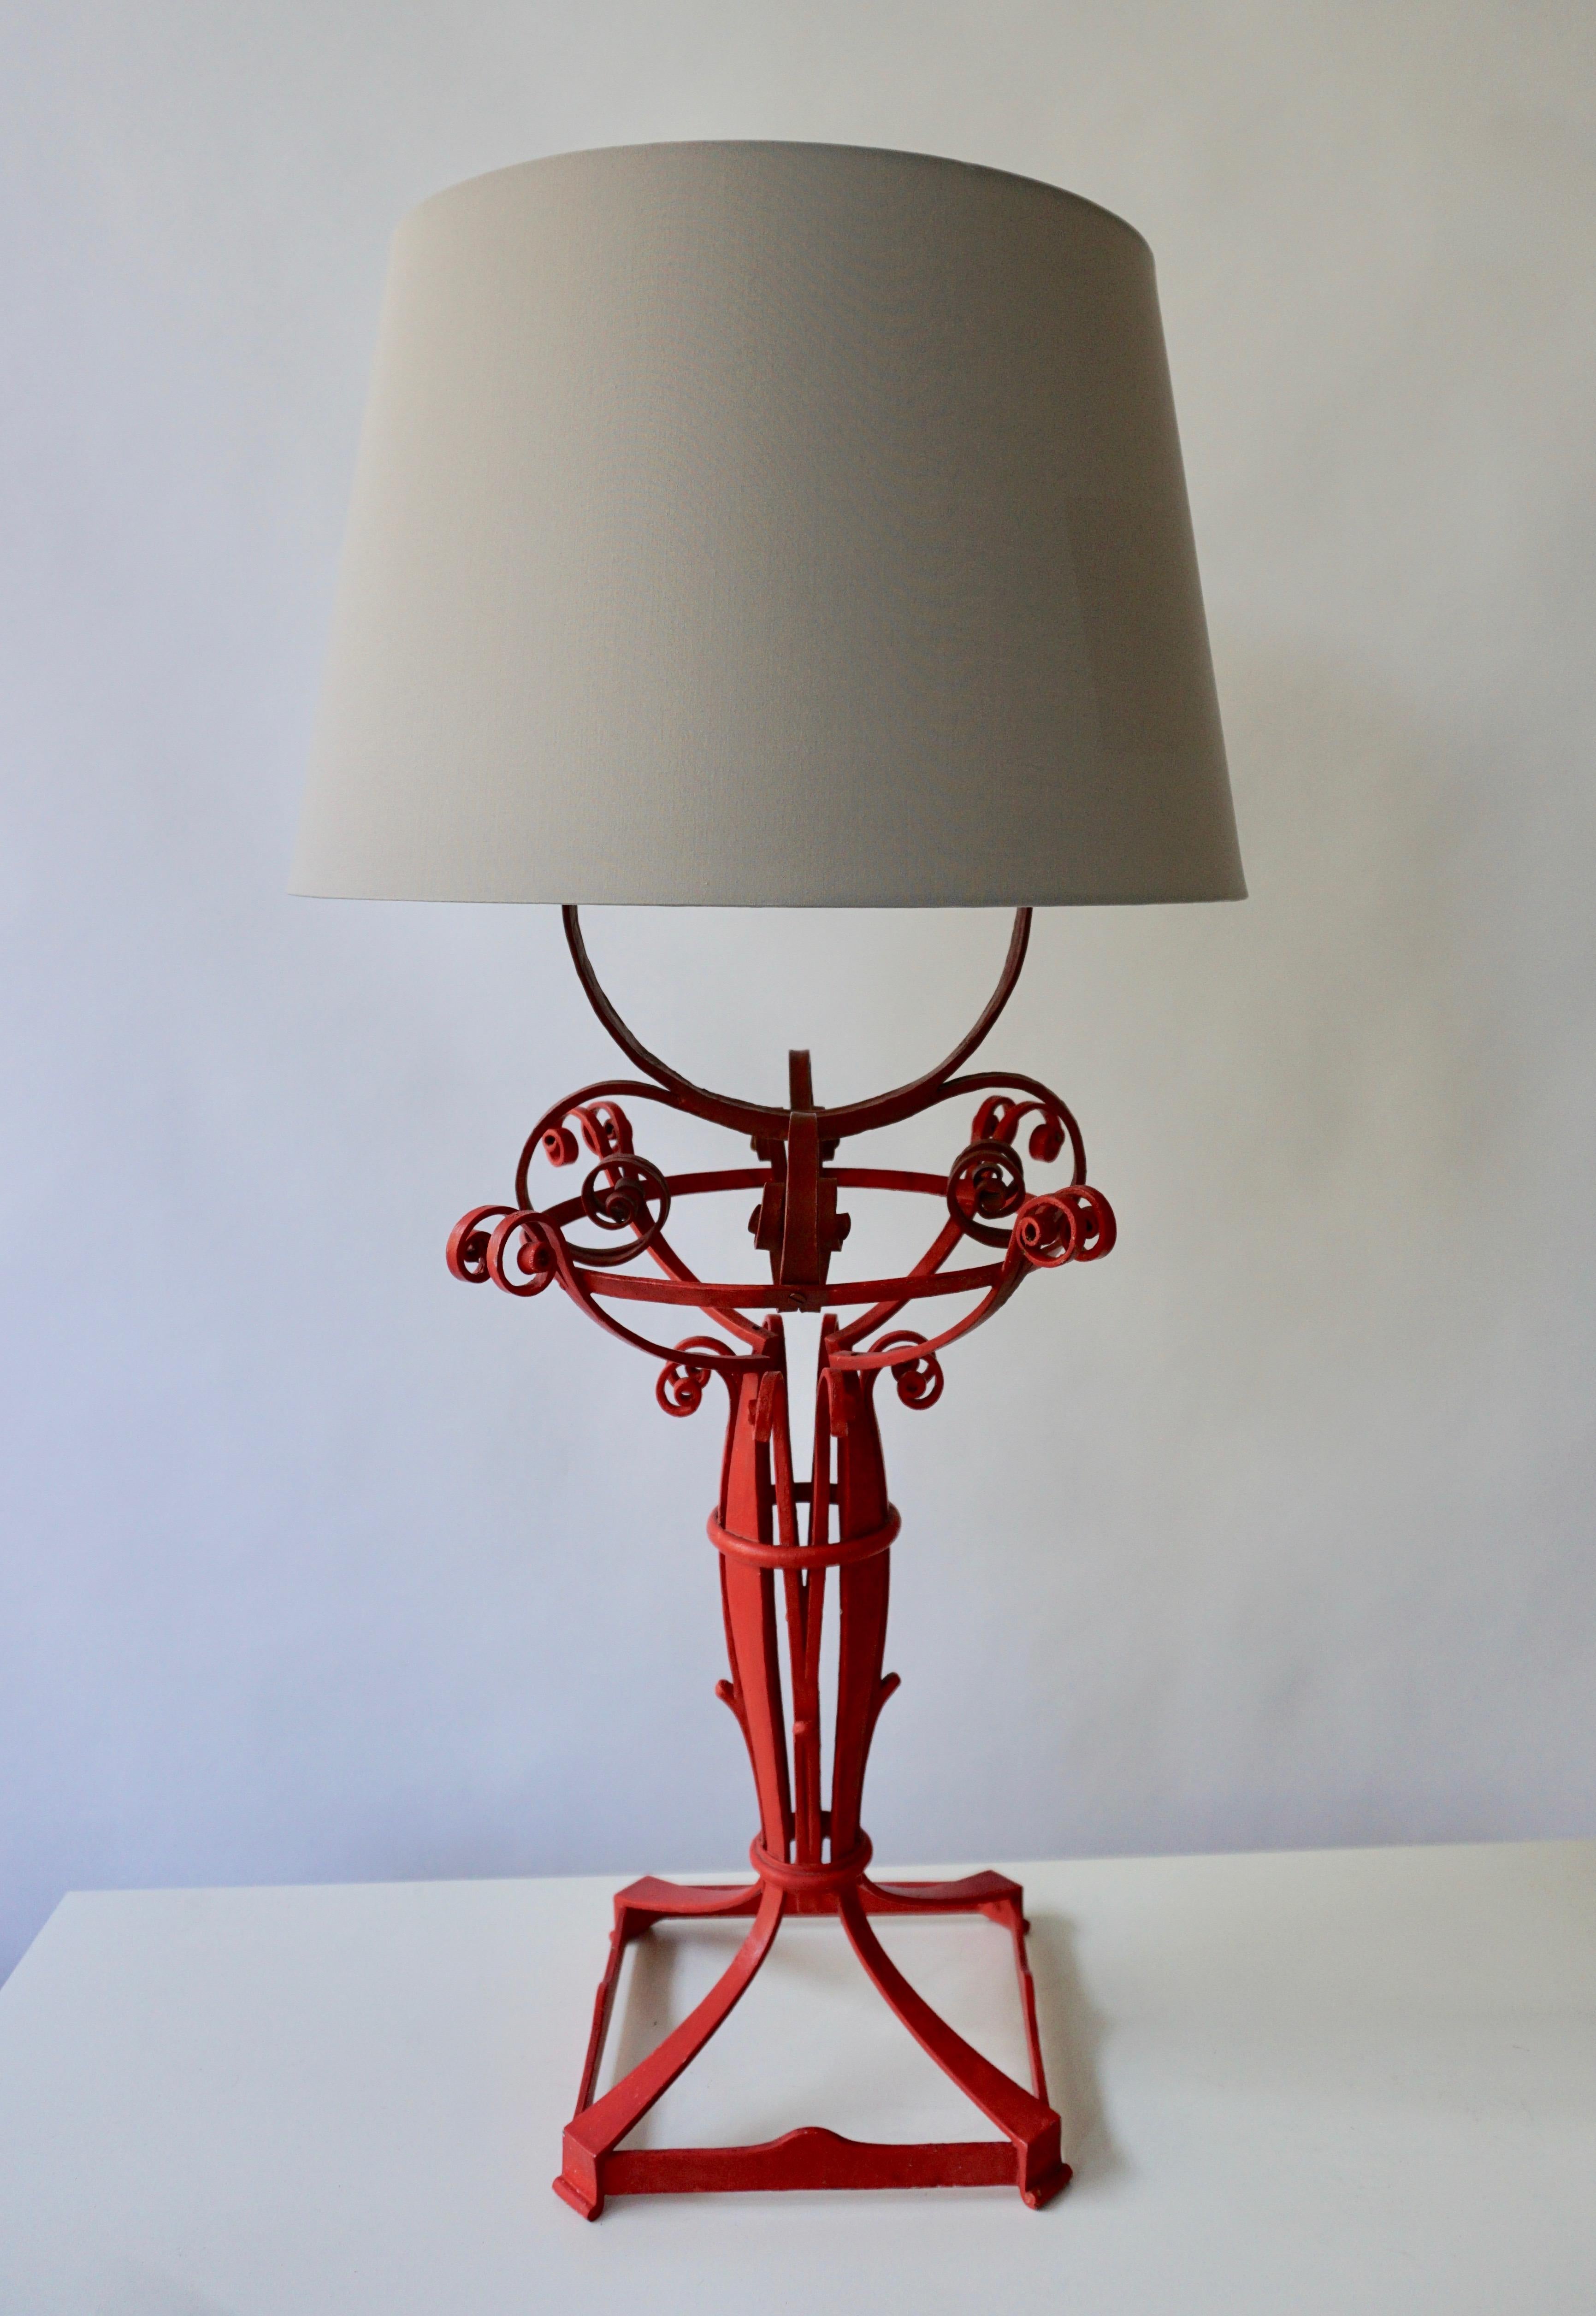 Wrought iron table lamp.
Measures: Width 30 cm.
Depth 30 cm.
Height 88 cm.
The lamp shade is not included in the price.